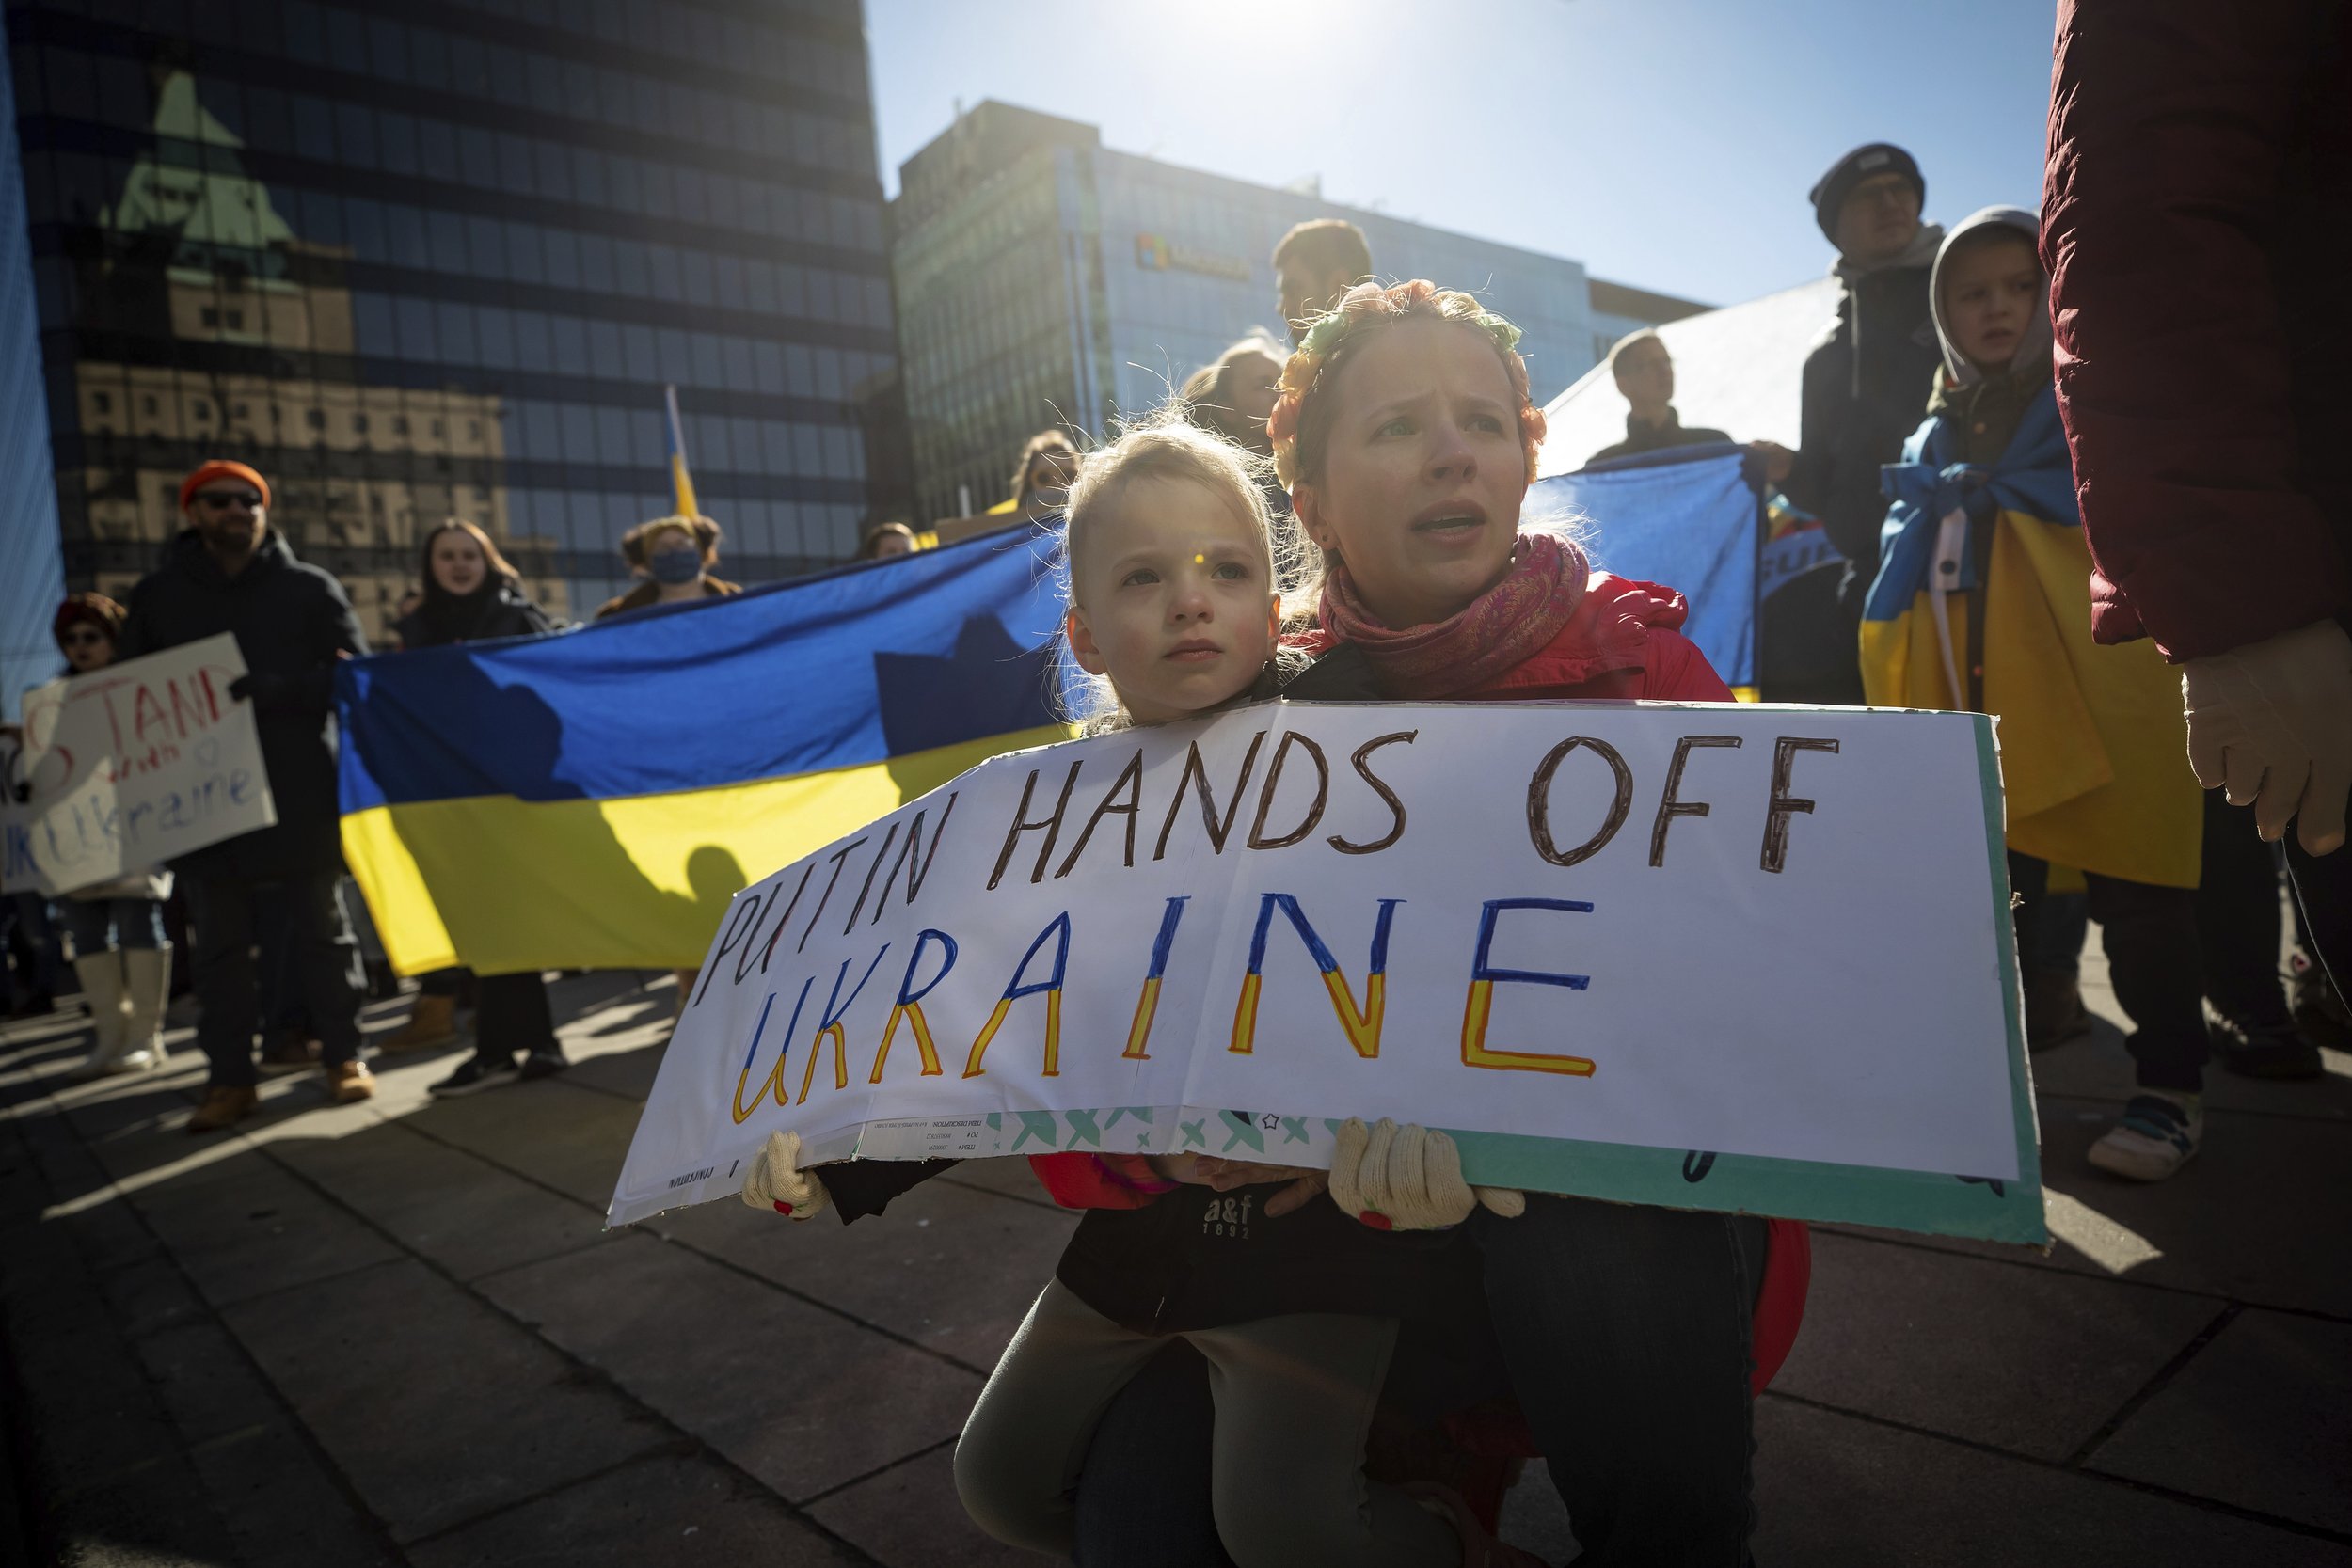  A woman and a young child hold a sign during a rally in support of the people of Ukraine, Thursday, Feb. 24, 2022, in Vancouver, British Columbia. (Darryl Dyck/The Canadian Press via AP) 